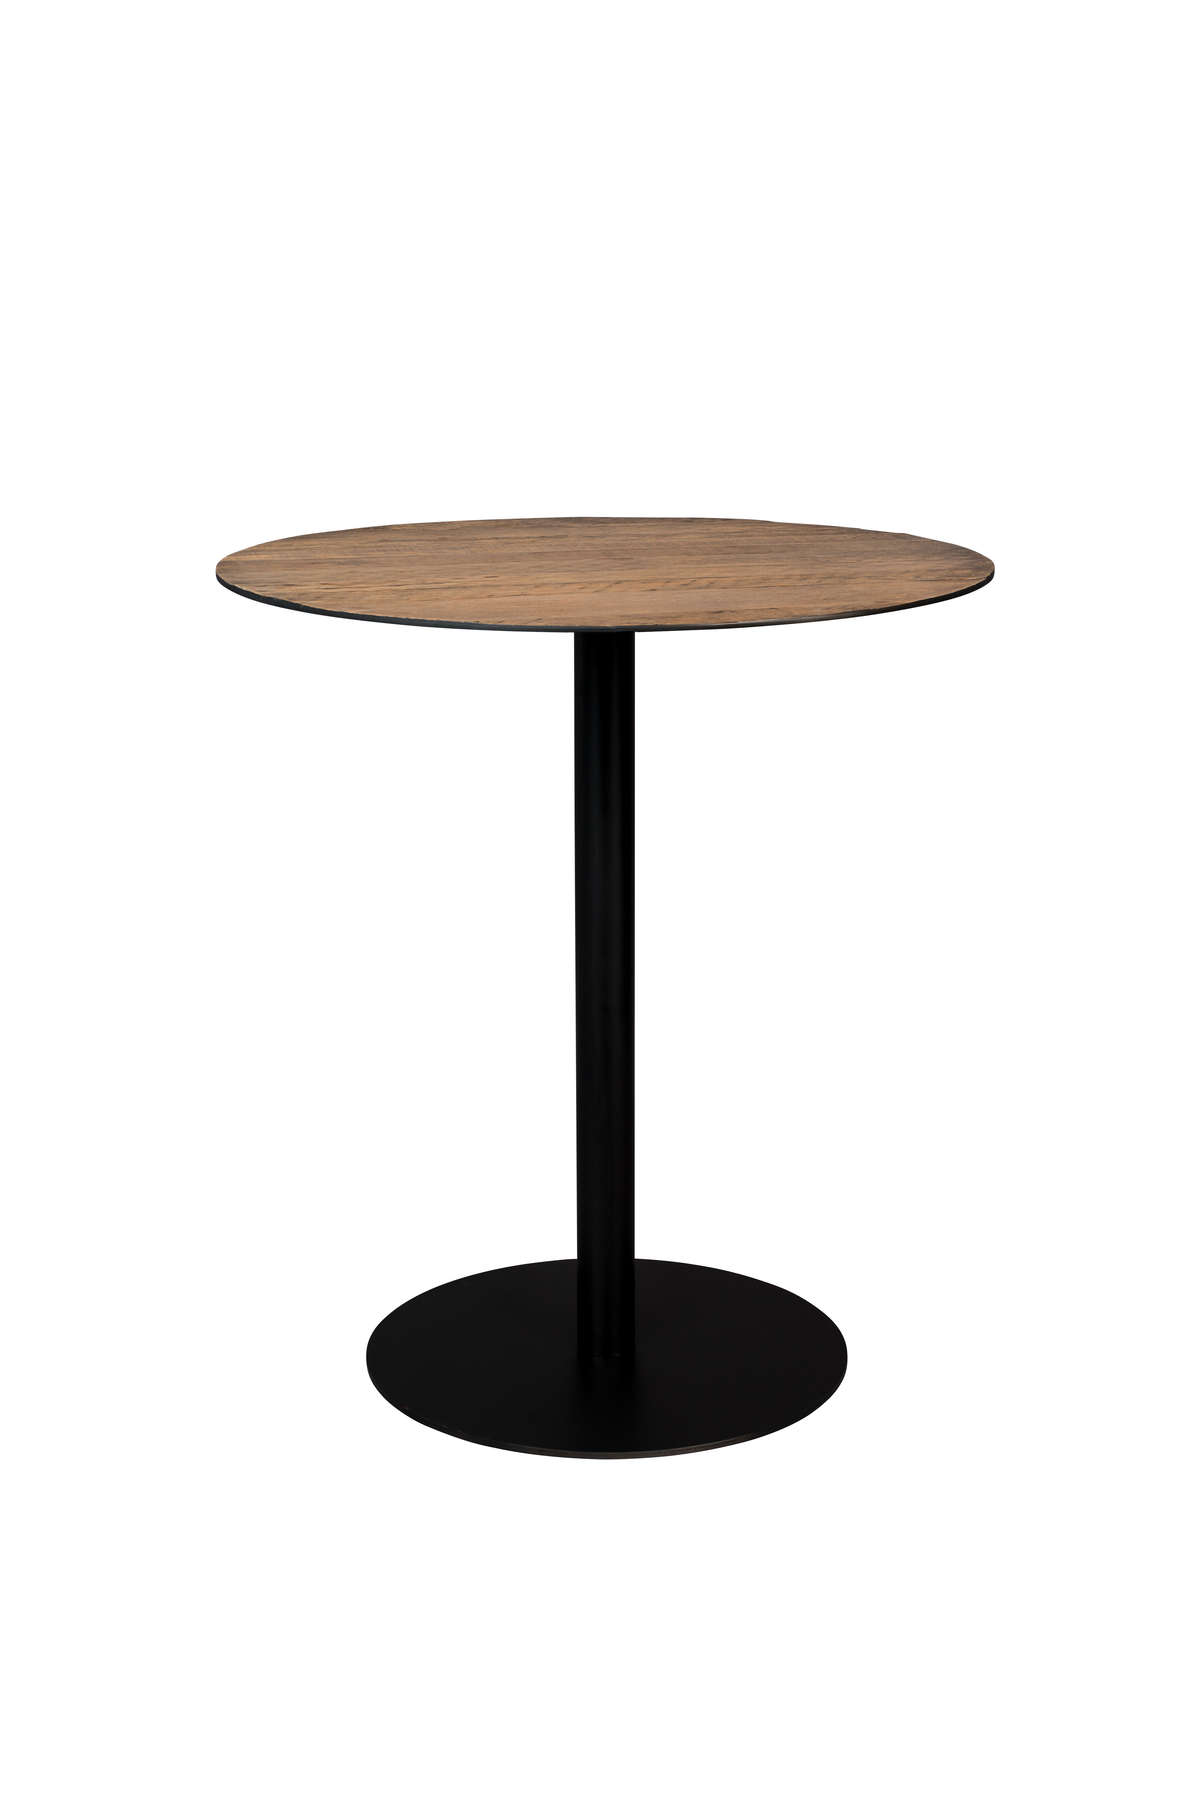 COUNTER TABLE BRAZA ROUND BROWN